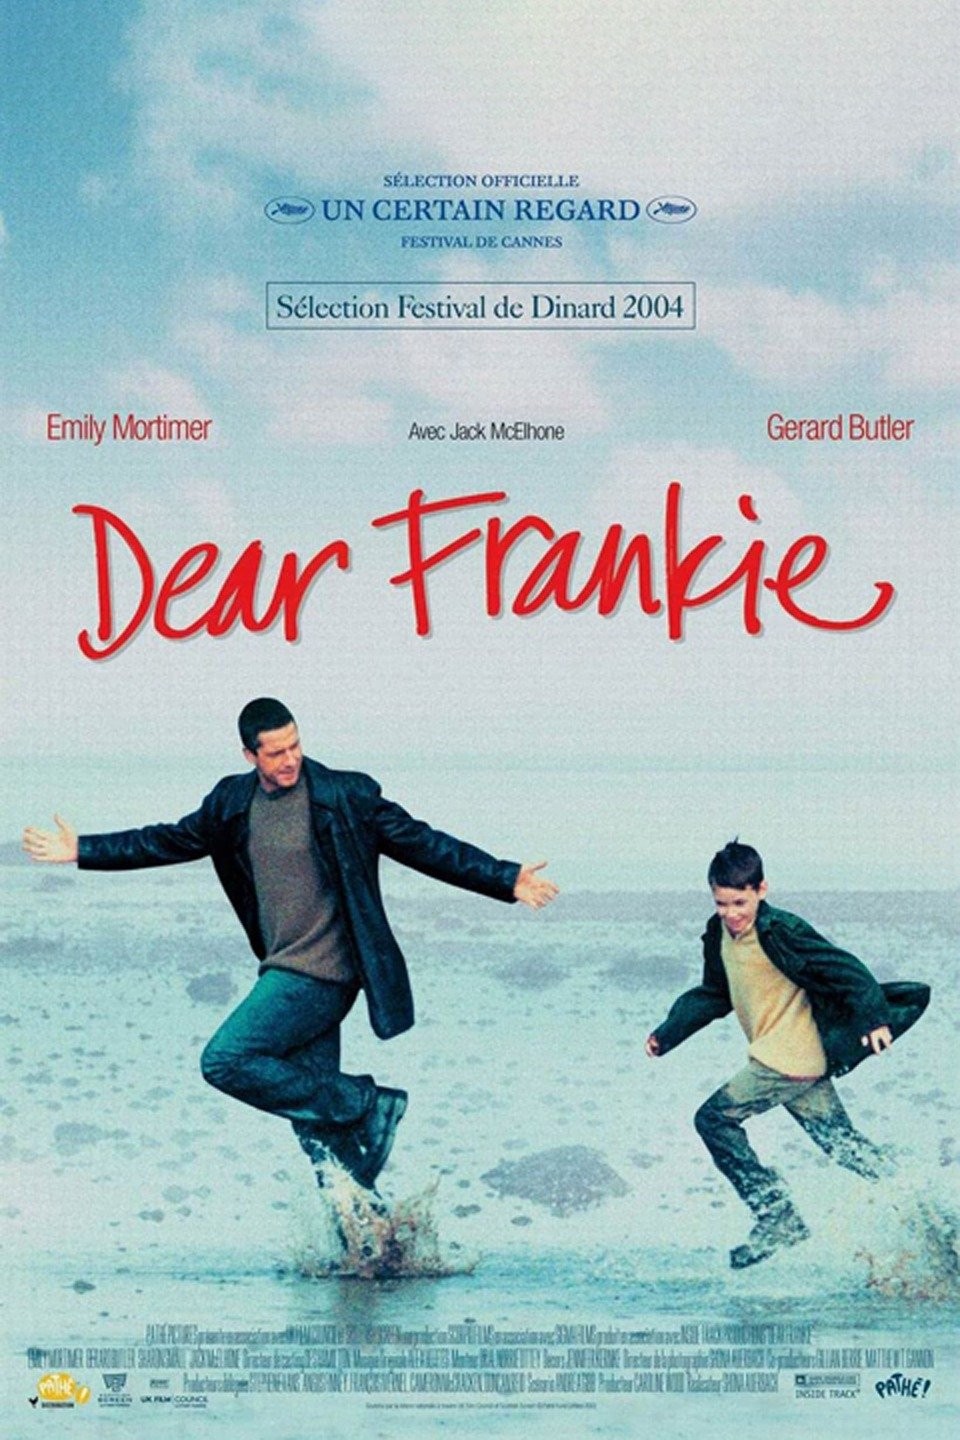 Dear Frankie (Film, Drama): Reviews, Ratings, Cast and Crew - Rate